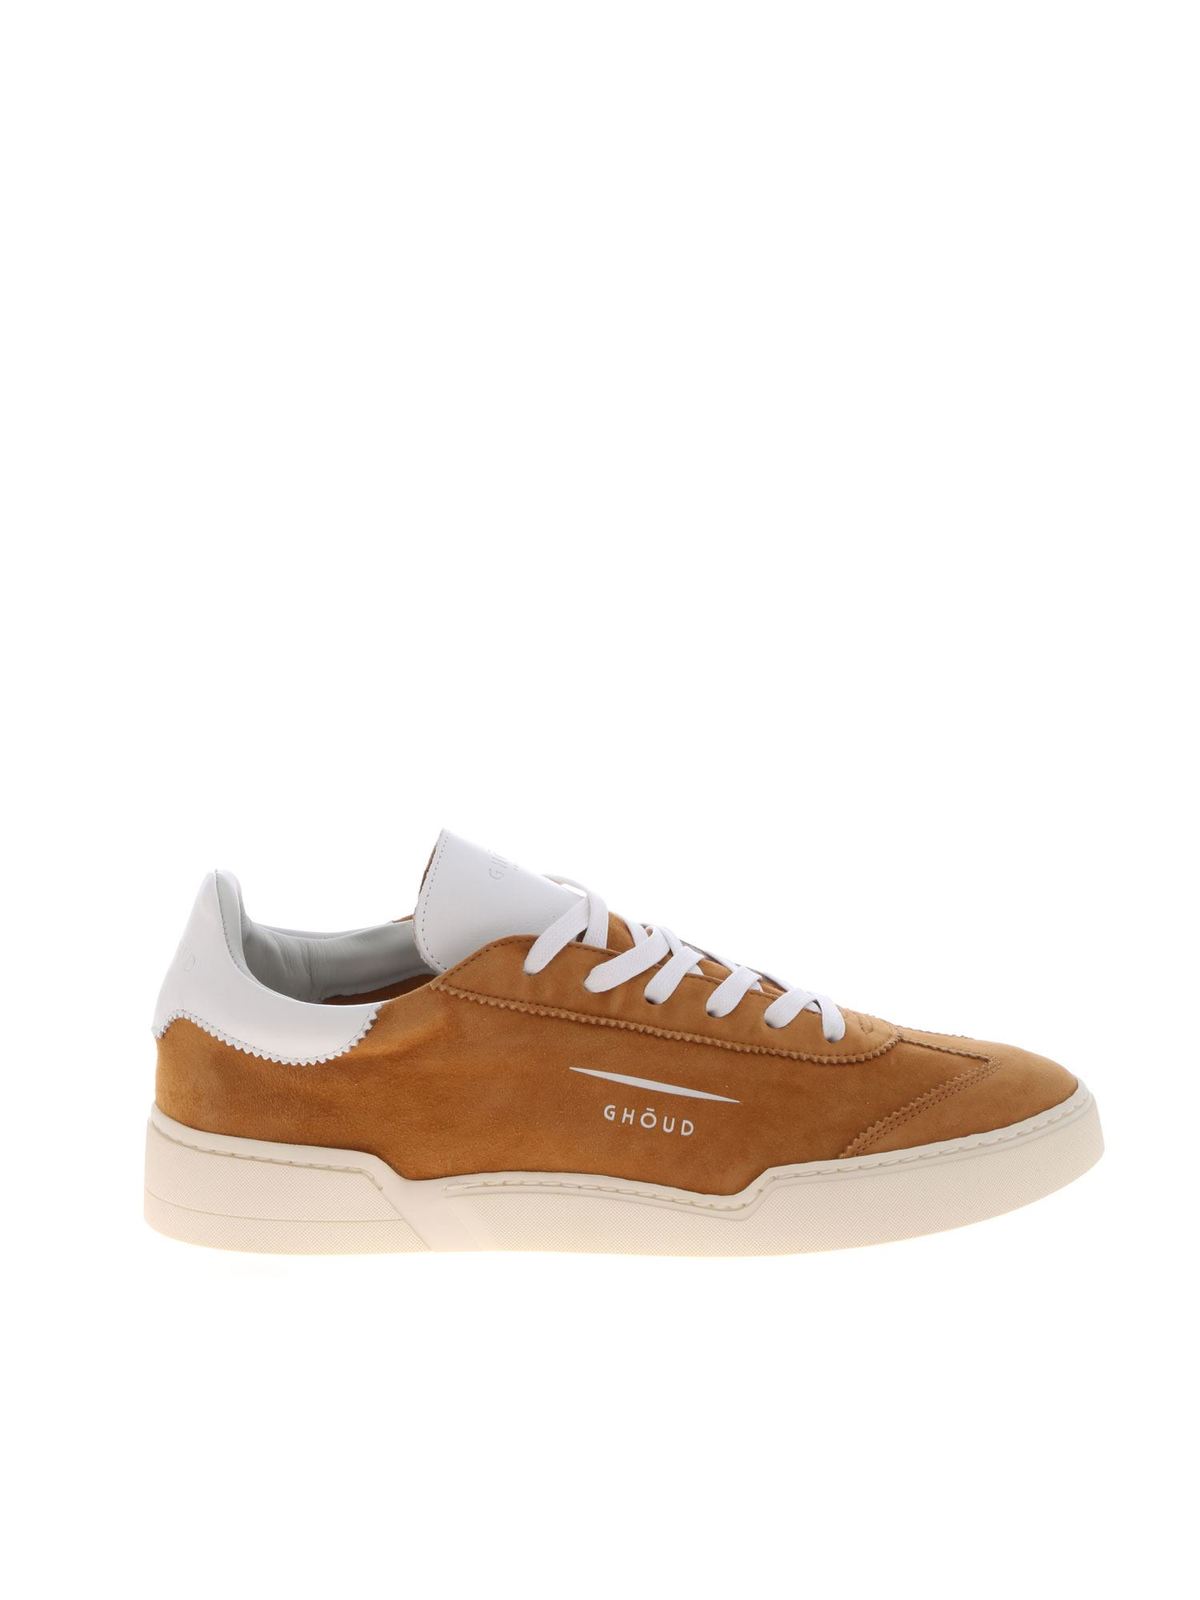 Trainers Ghoud Venice - Camel-colored leather sneakers - L1LMSL61